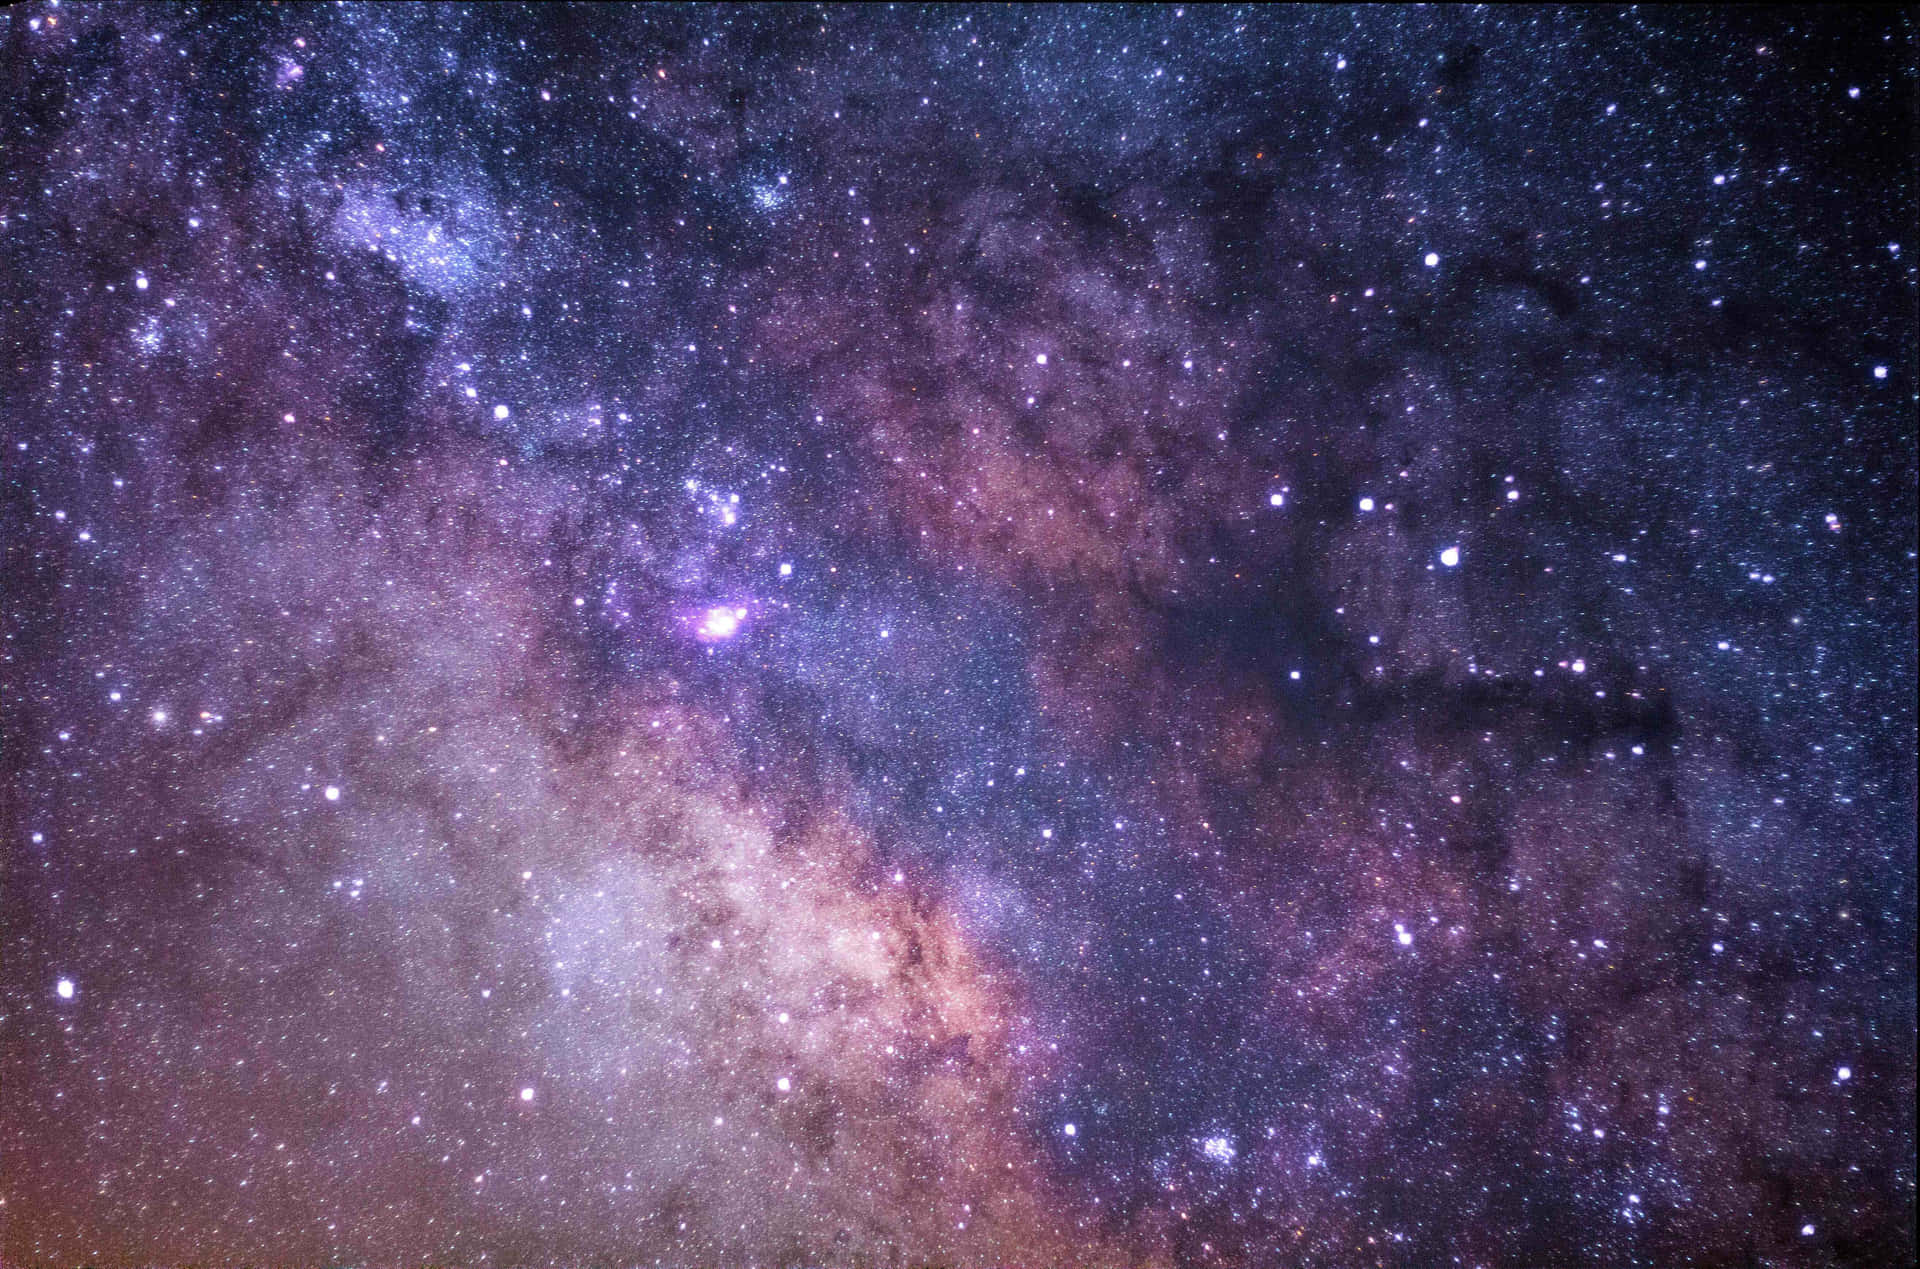 Space Background